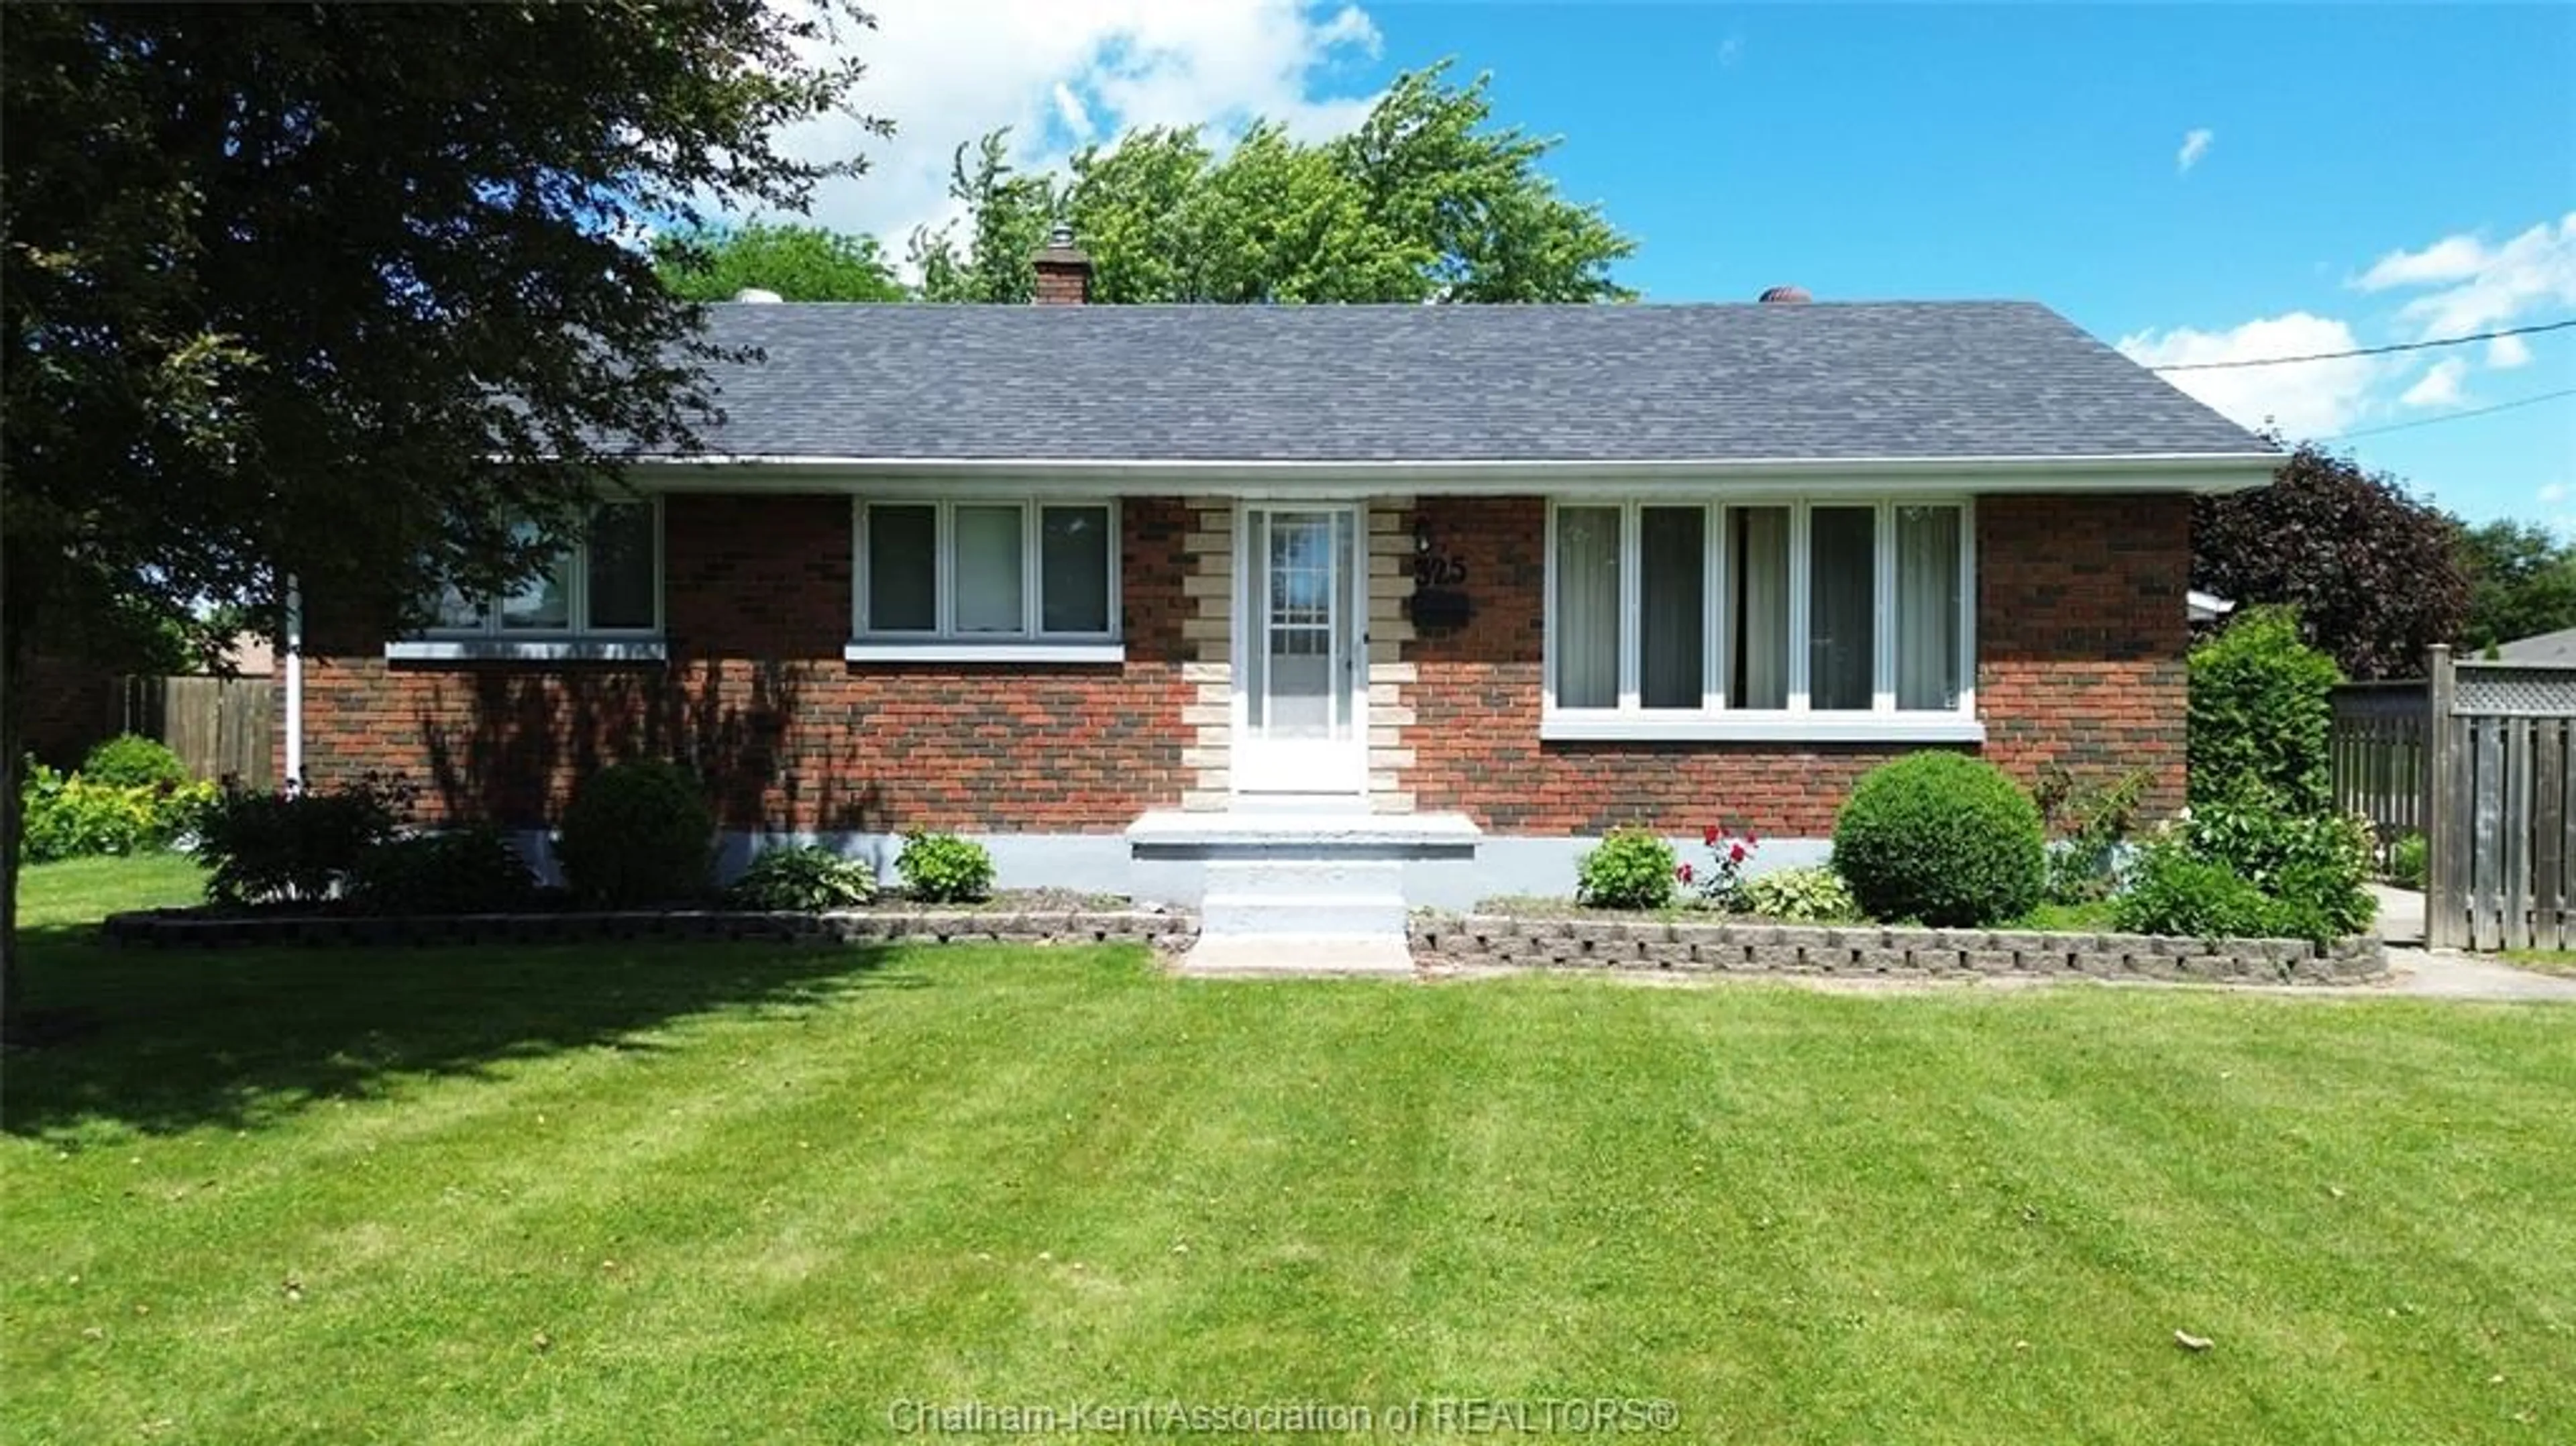 Home with brick exterior material for 325 Thomas Ave, Wallaceburg Ontario N8A2C1